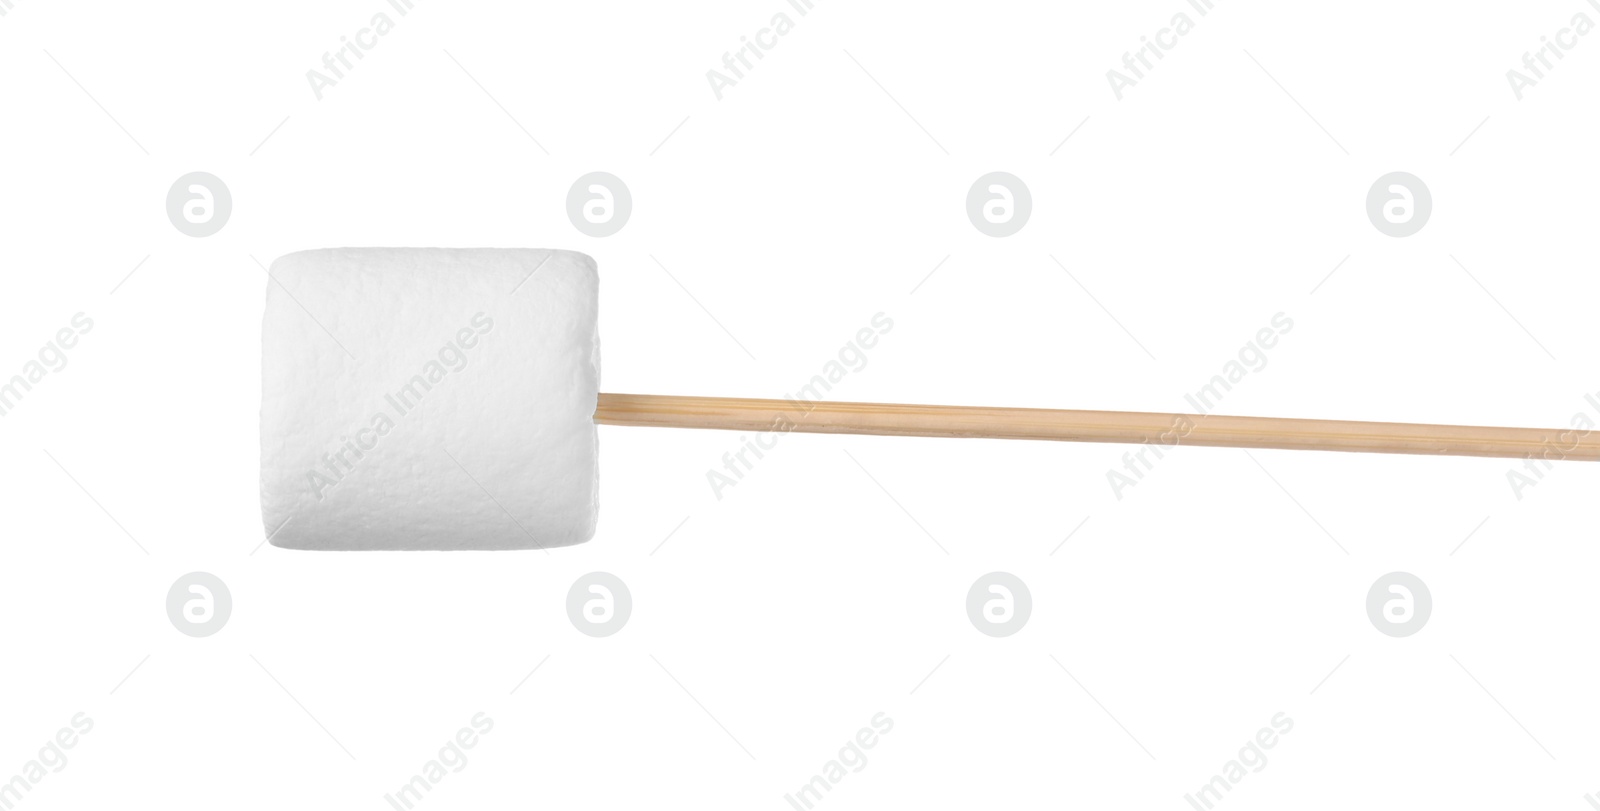 Photo of Stick with delicious puffy marshmallow isolated on white